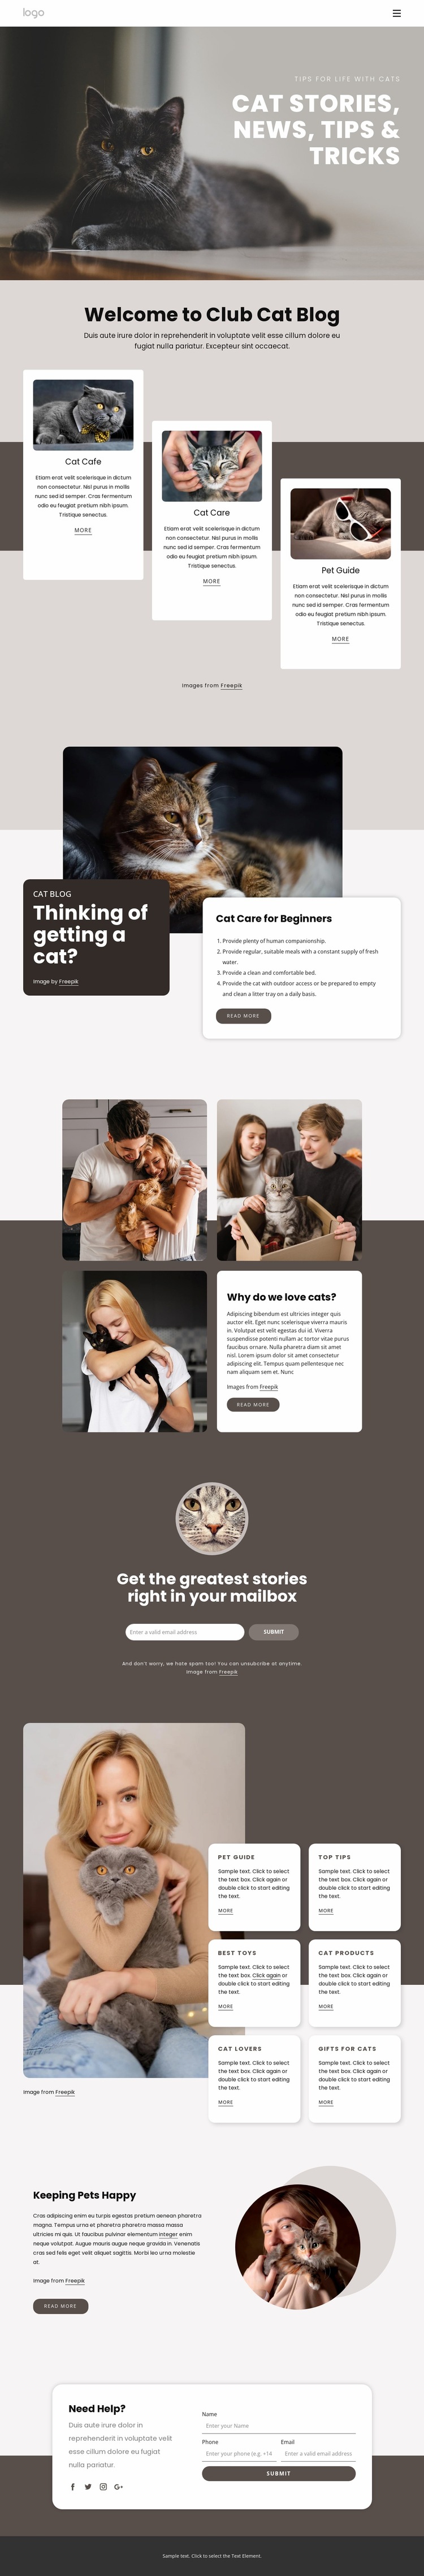 Cat stories, tips and tricks Website Builder Templates